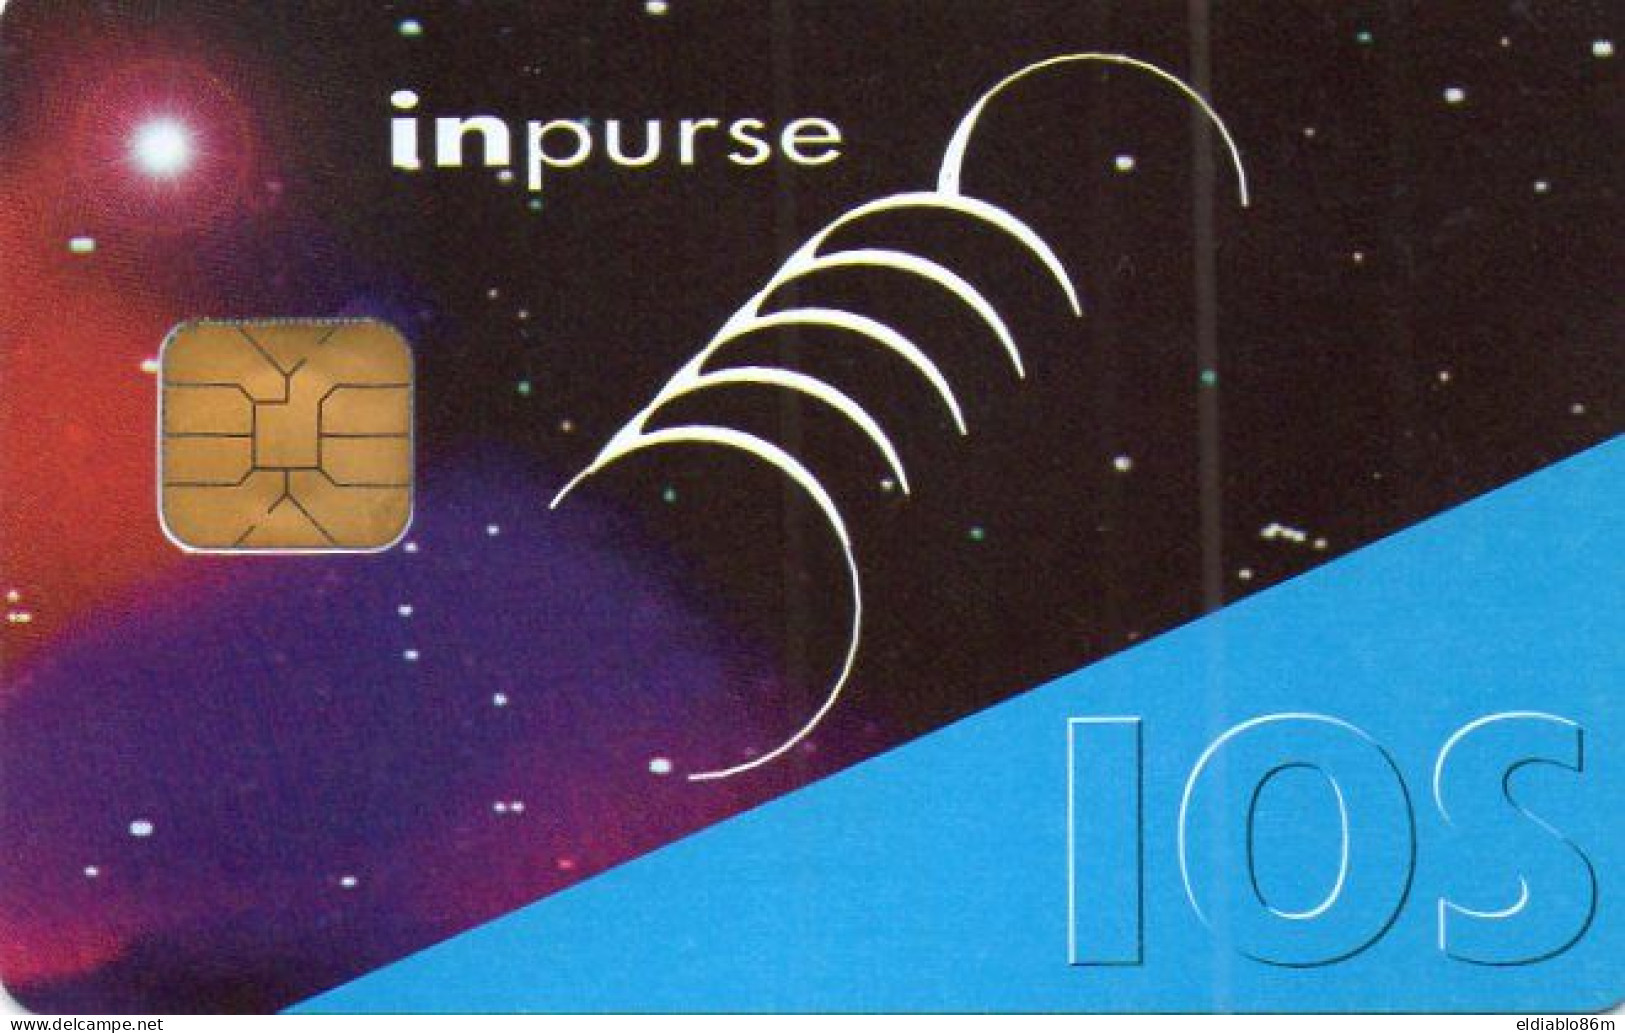 ITALY - CHIP CARD - TEST CARD - INCARD - INPURSE - STORED VALUE CARD BASIC - C&C 5513 - Tests & Servizi